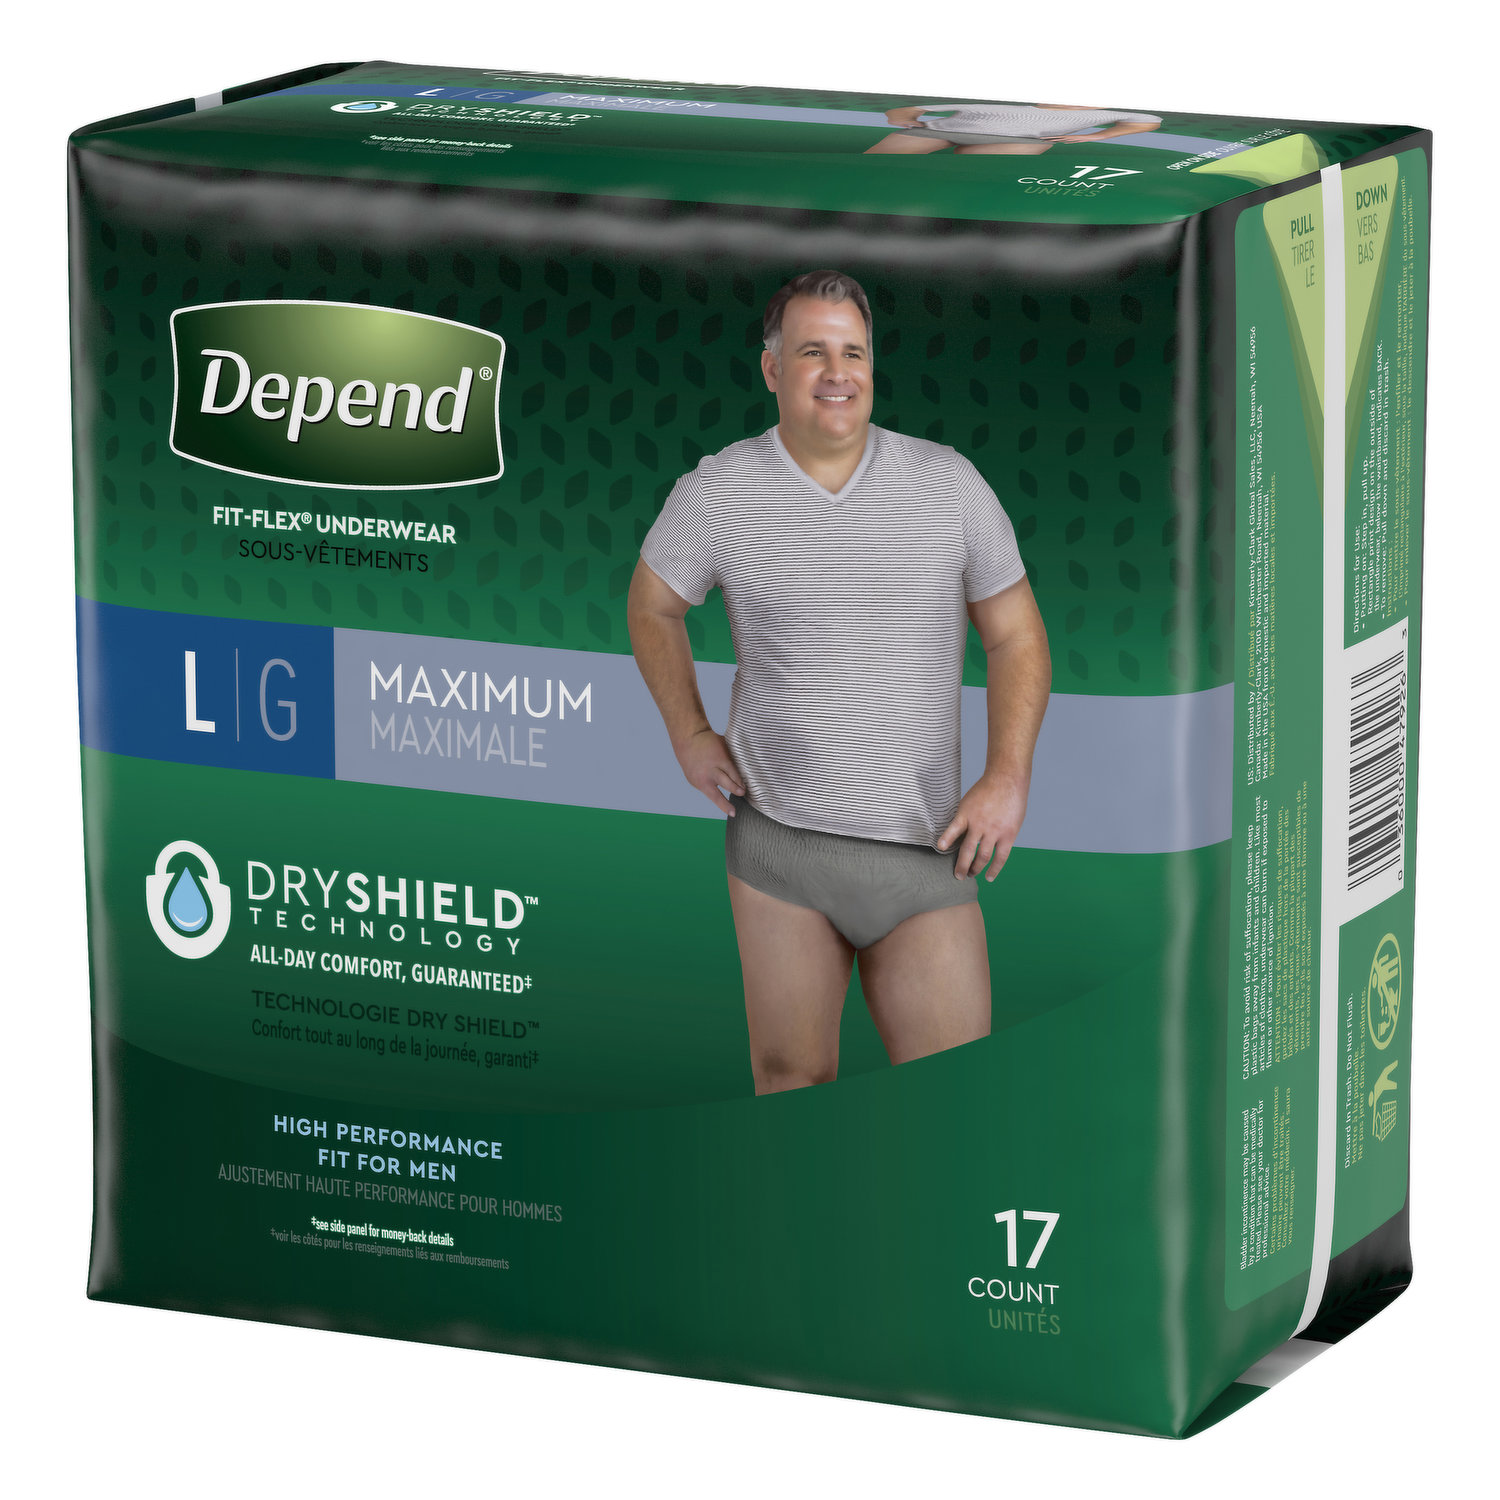 Depend Fresh Protection Adult Incontinence Underwear for Men, Maximum, L,  Grey, 40Ct